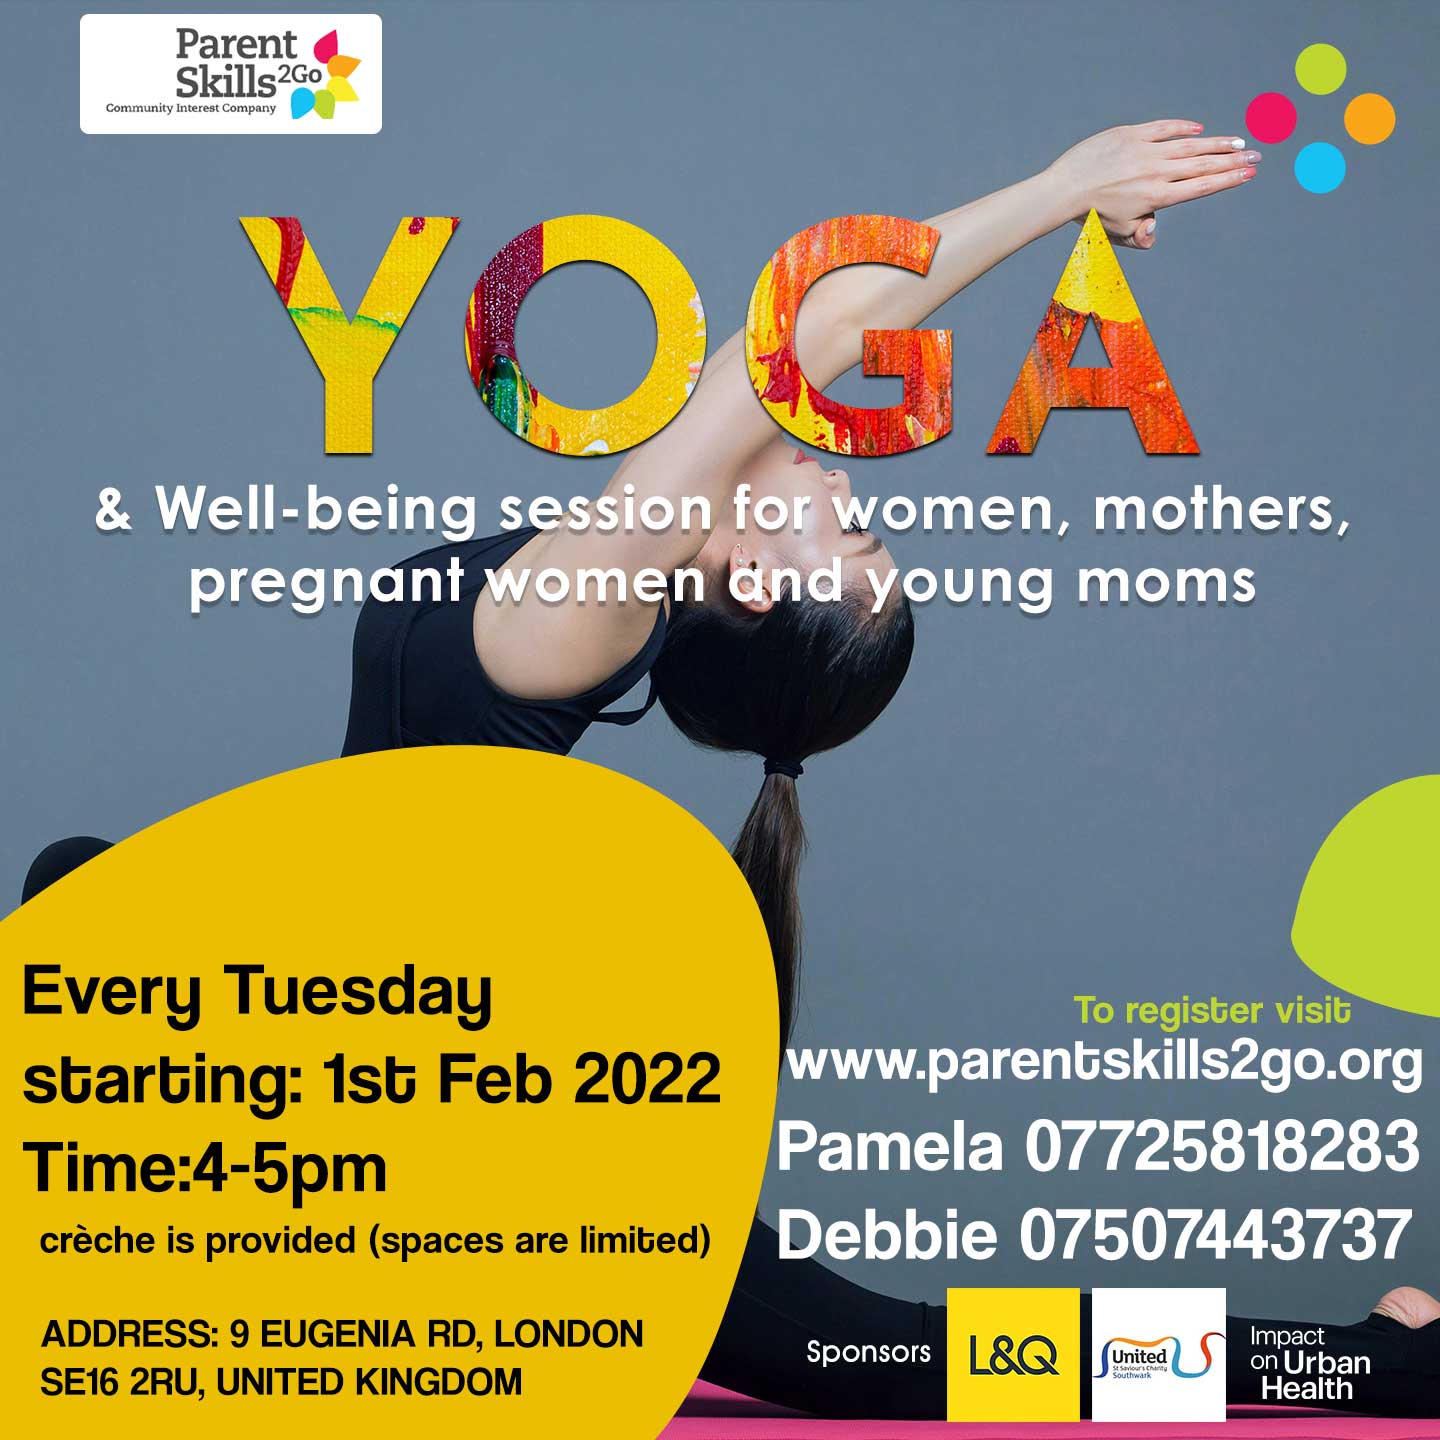 Yoga & well-being session for women, mothers, pregnant women in London